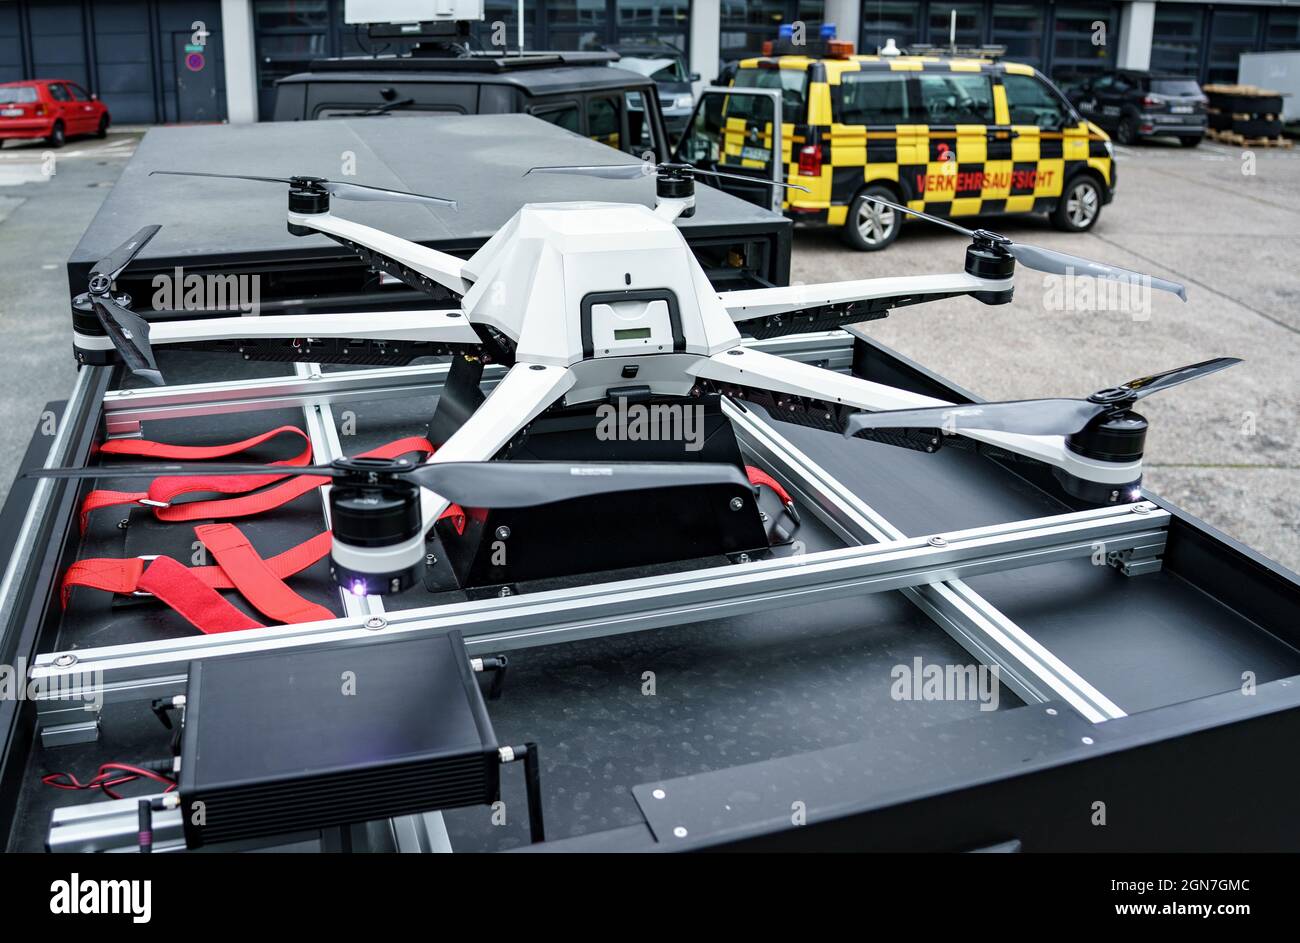 23 September 2021, Hamburg: A drone from the "Falke" project lies on a  trailer on the grounds of Hamburg Airport. The project aims to realize the  hunt for a drone entering the